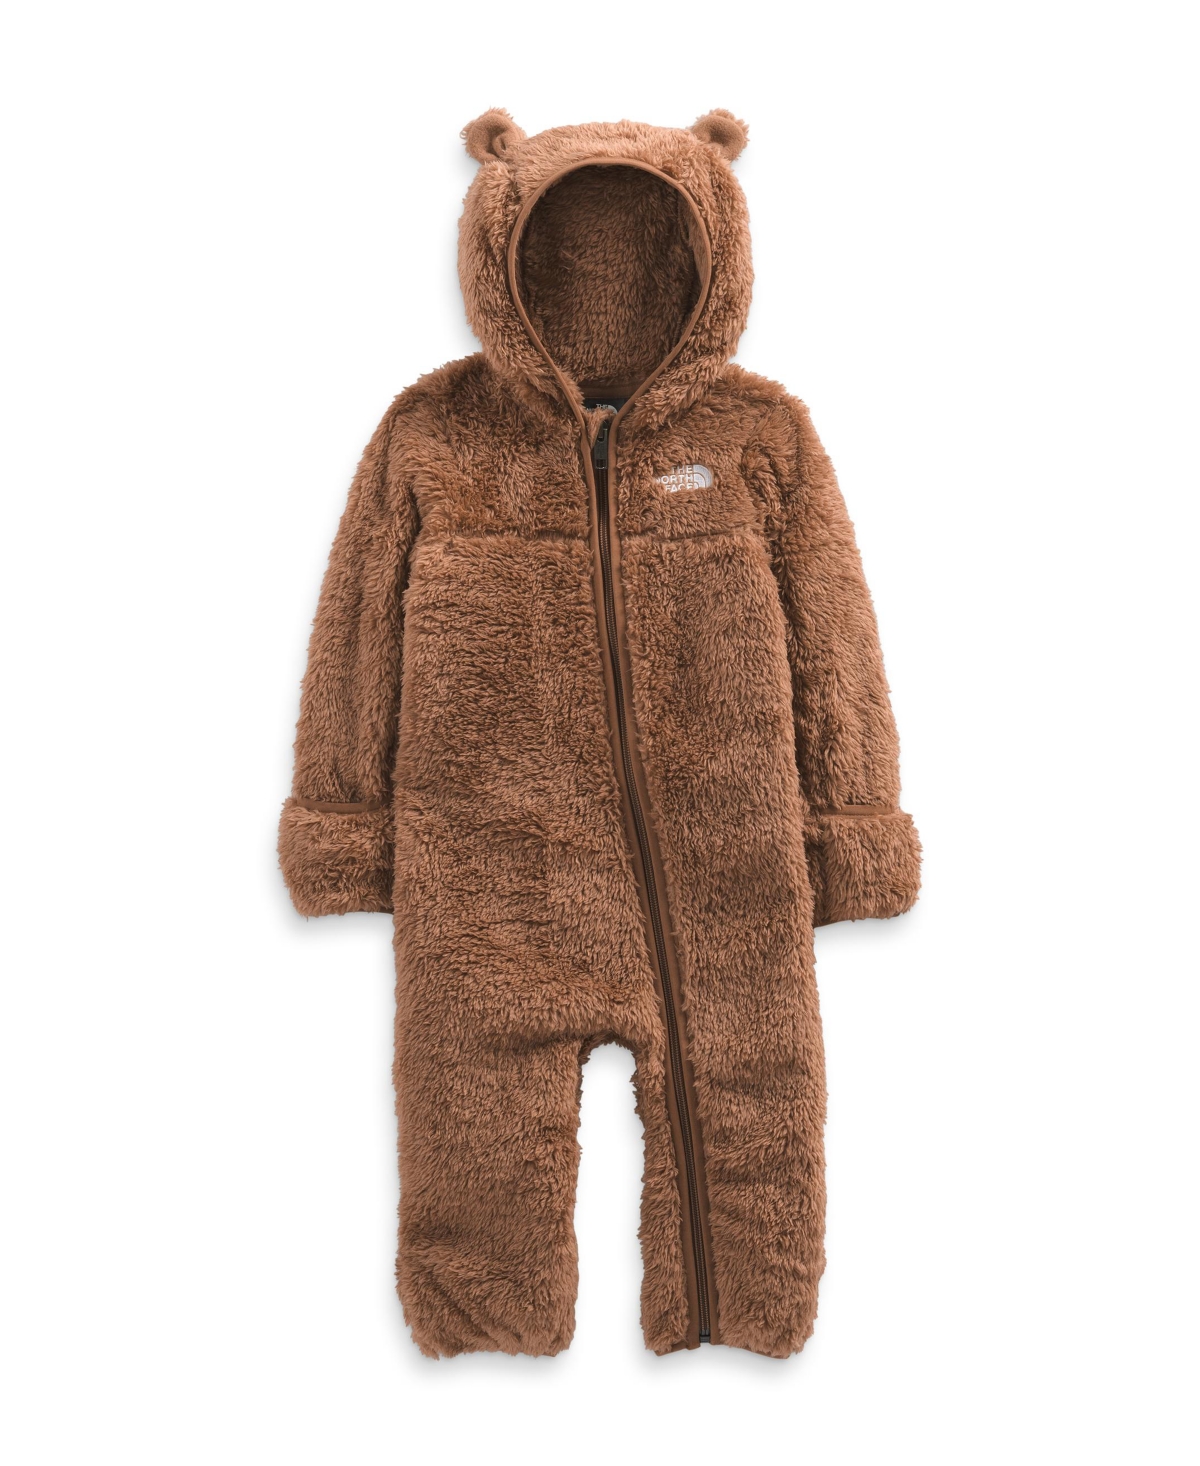 THE NORTH FACE BABY BOYS OR BABY GIRLS BEAR ONE PIECE COZY COVERALL